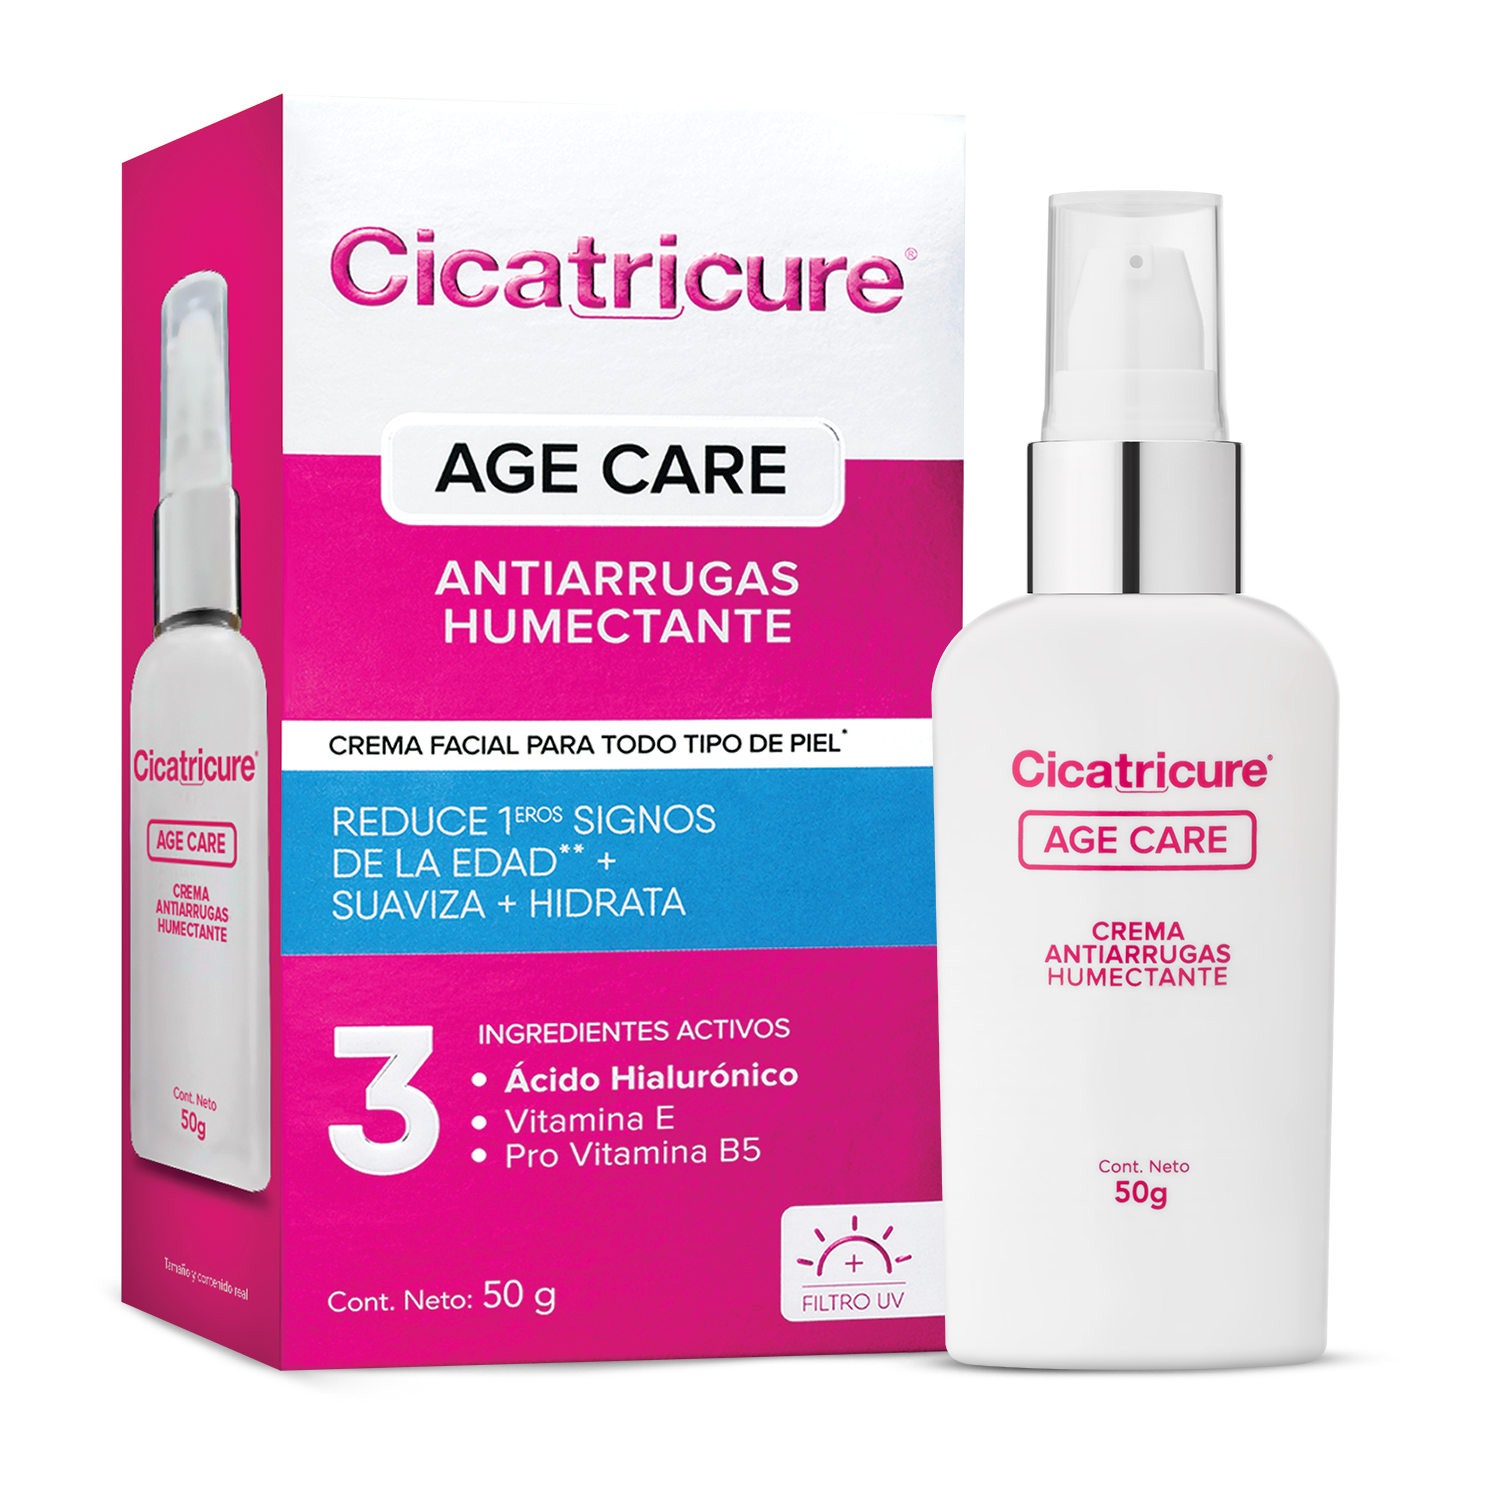 CICATRICURE AGE CARE HUMECTANTE X 50 G.